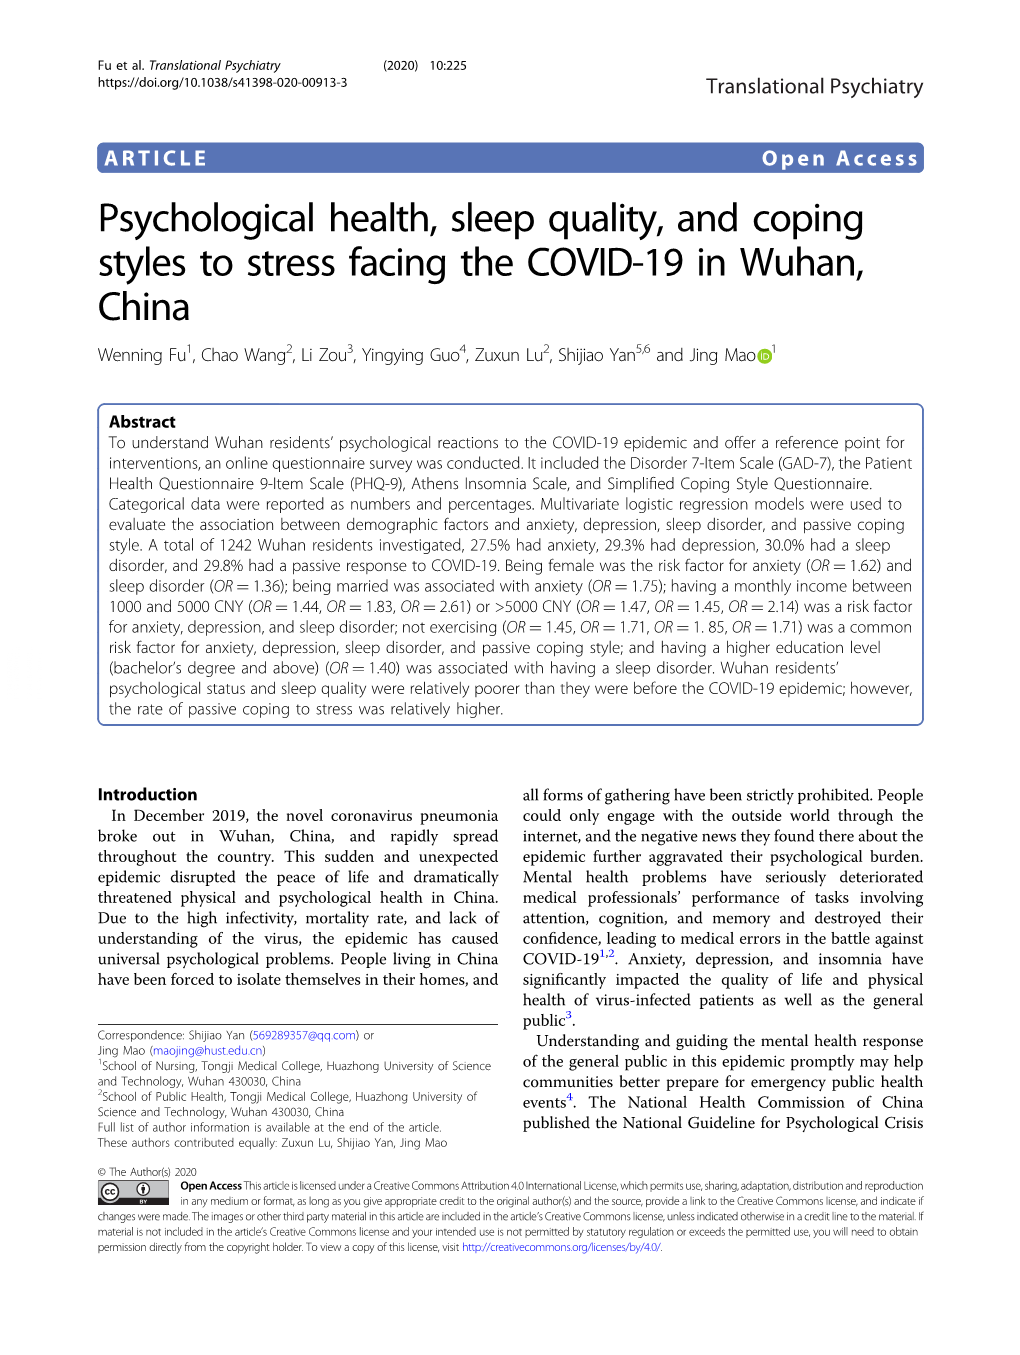 Psychological Health, Sleep Quality, and Coping Styles to Stress Facing